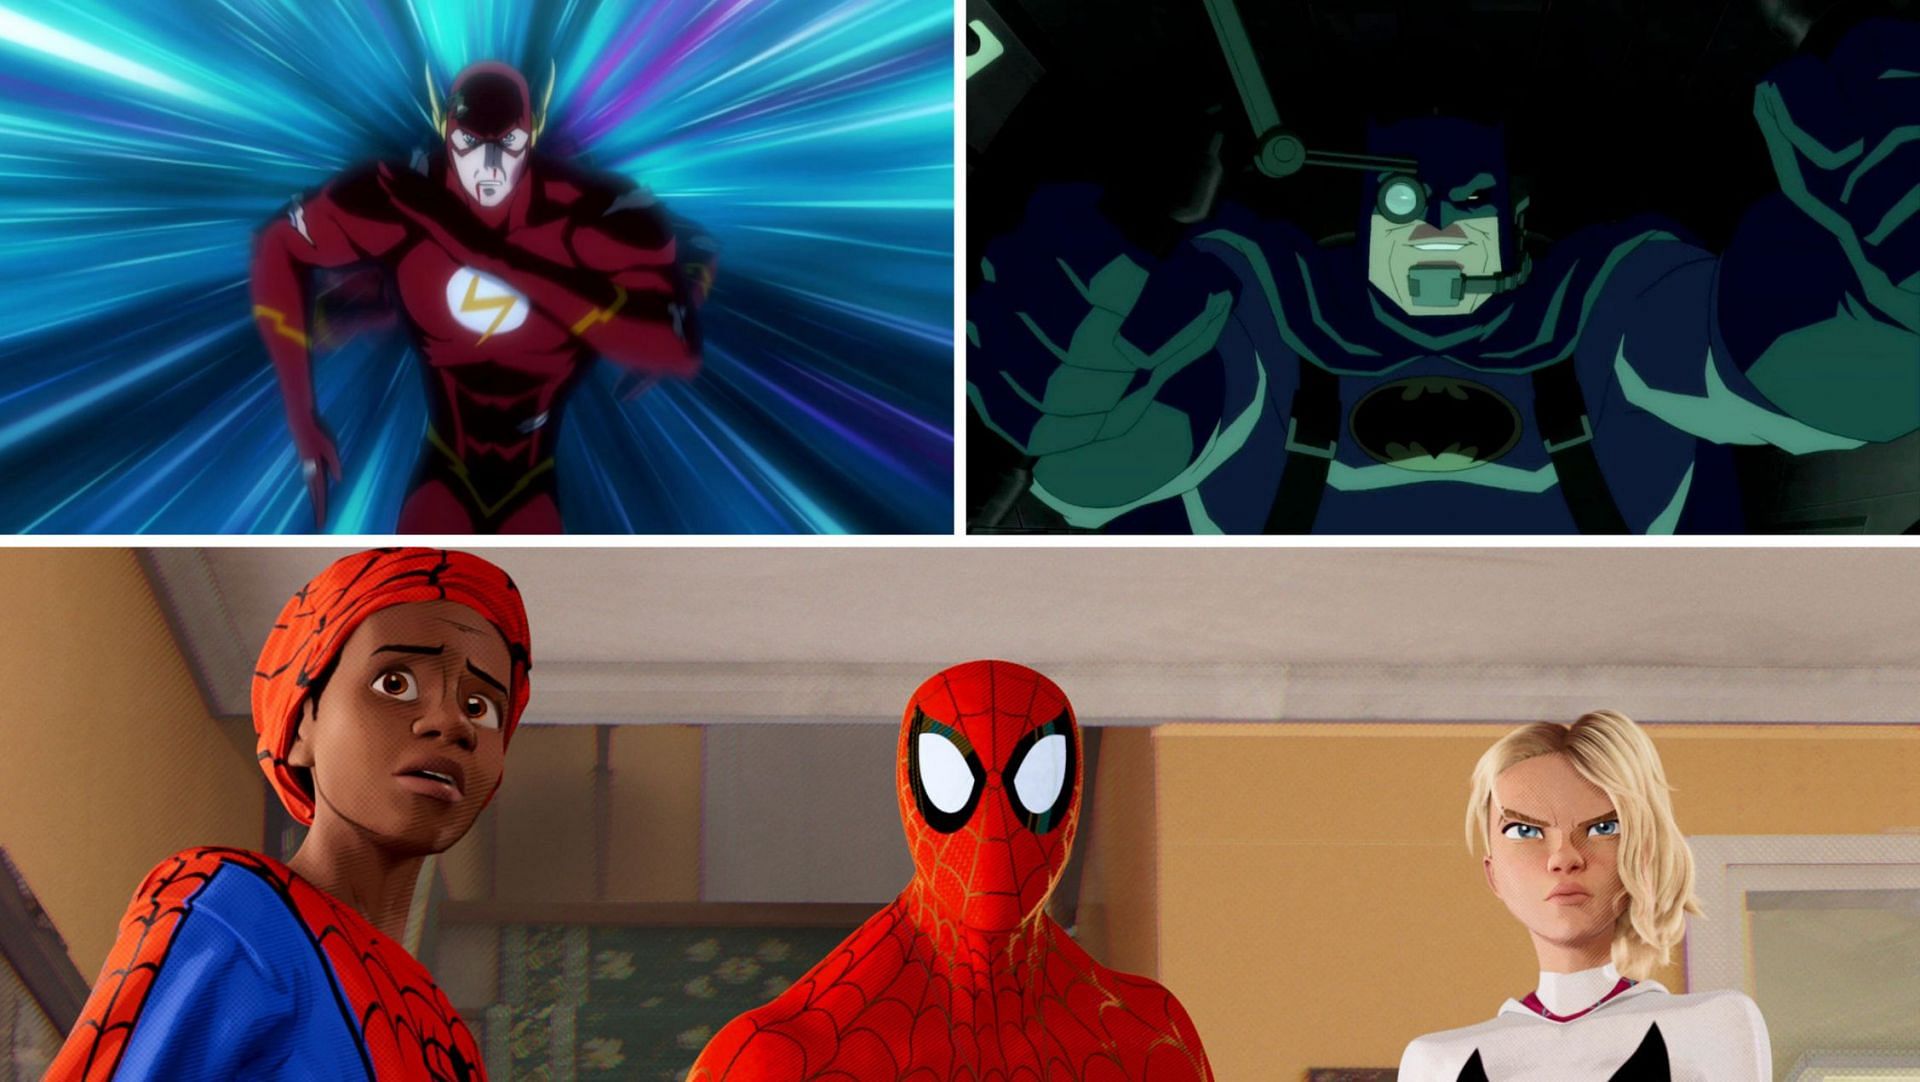 The 20 DC Animated Movies You Need To Watch Ranked